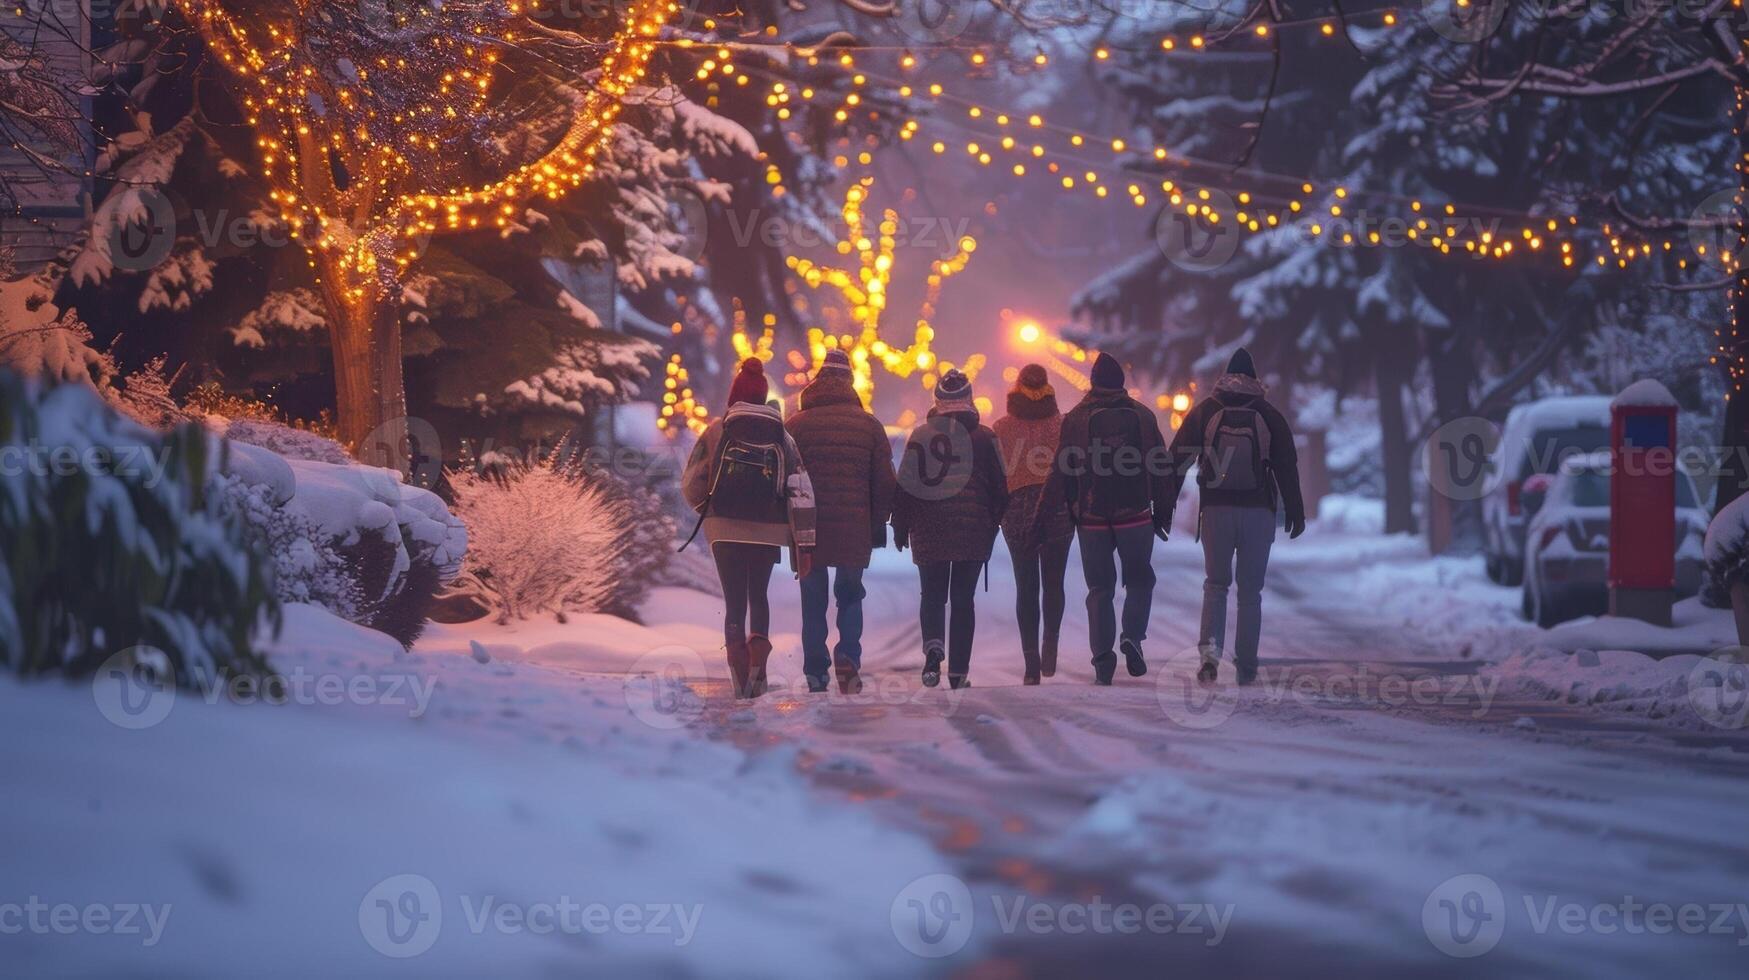 A group of friends bundled up walking through a snowy neighborhood on their way to see a festive light display photo